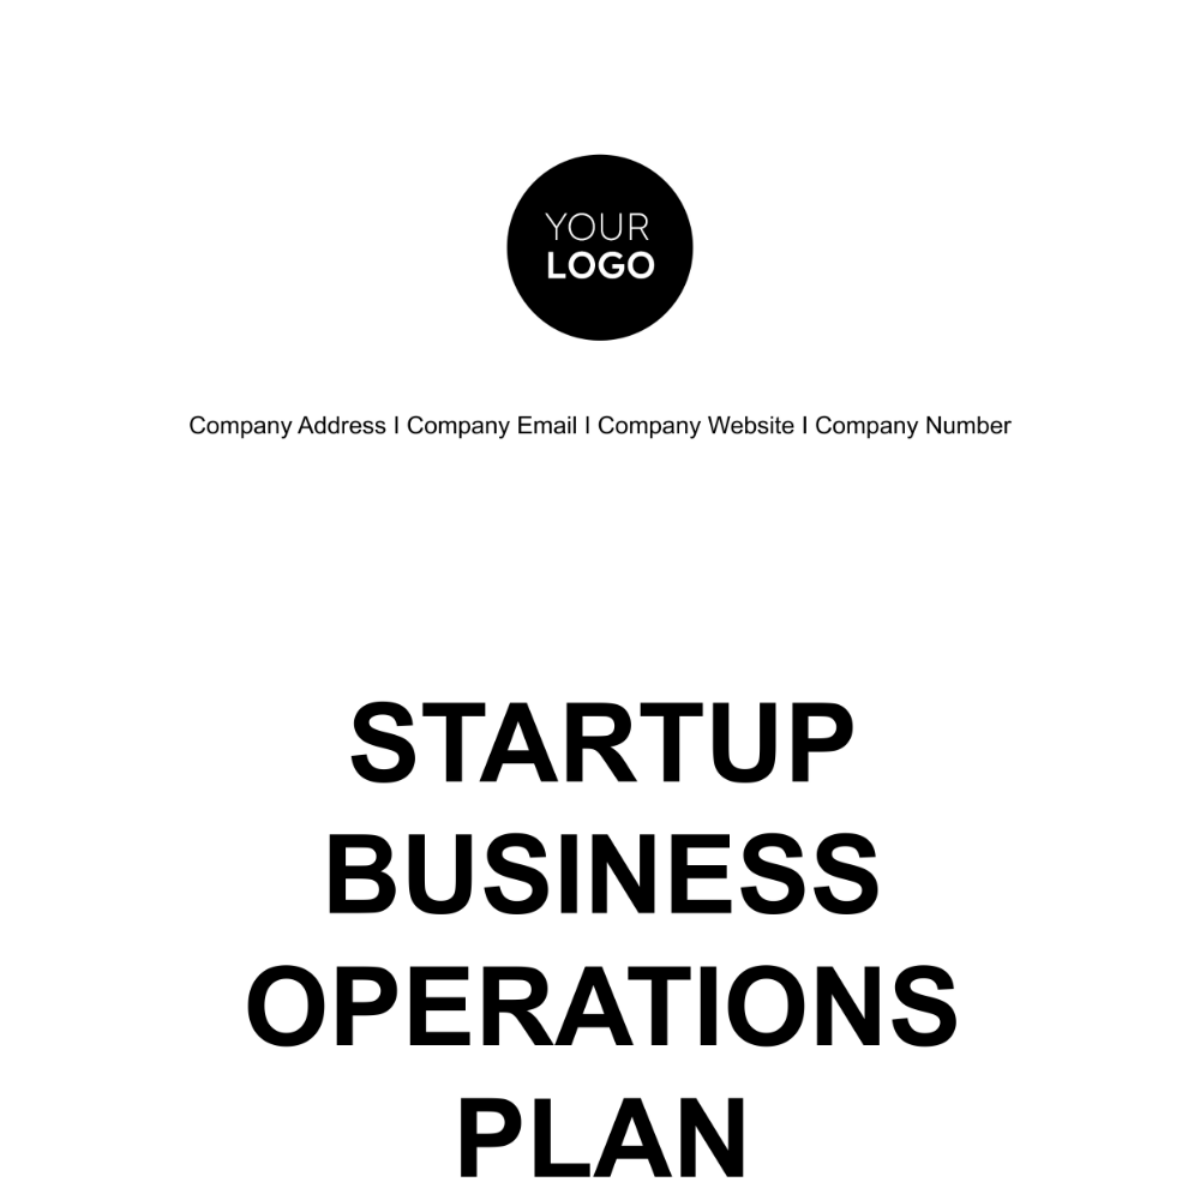 Startup Business Operations Plan Template